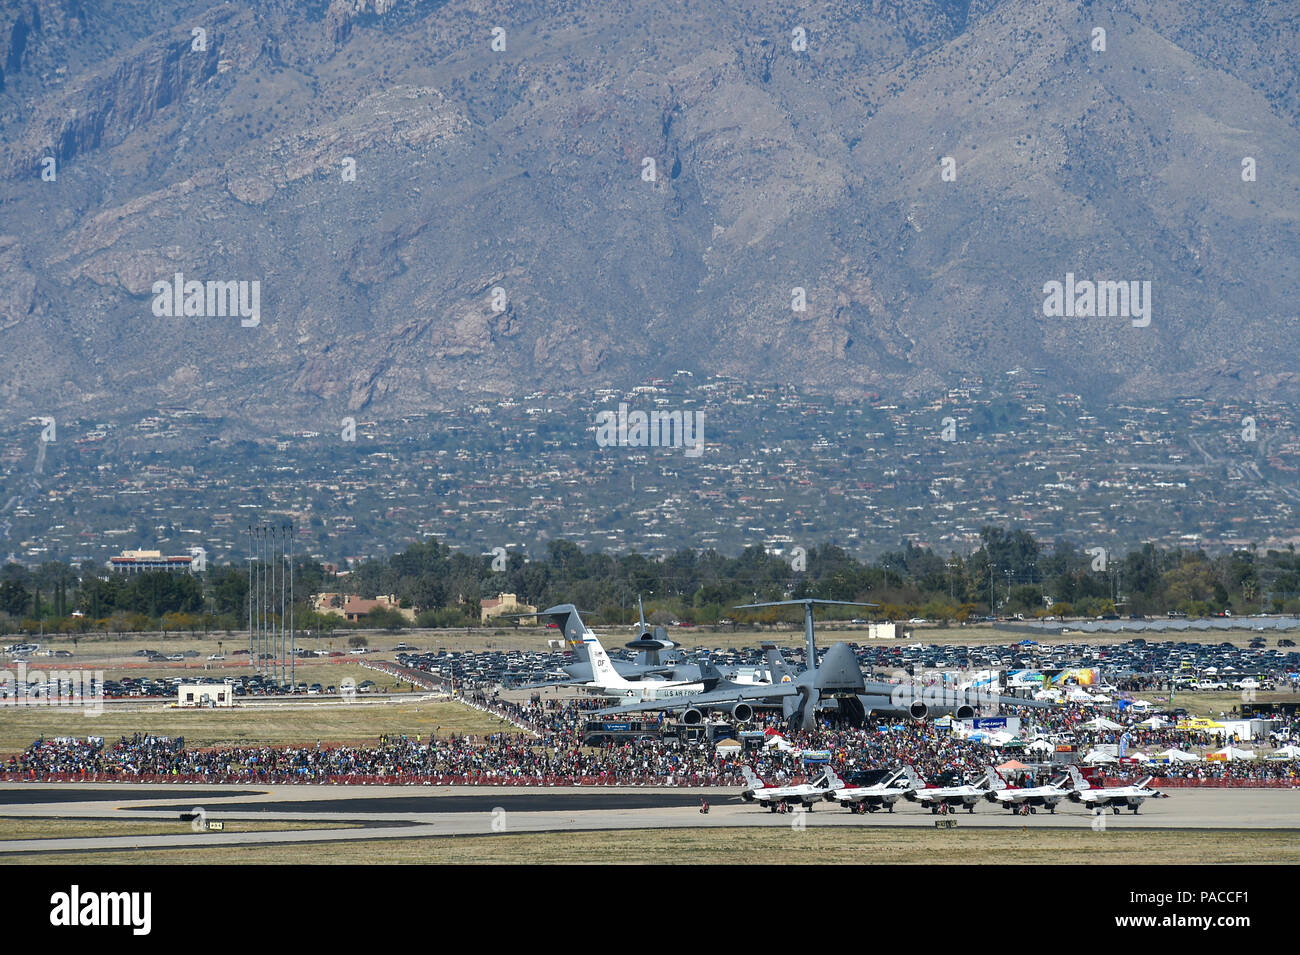 Thousands of attendees gather to watch aerial demonstrations and look at static displays on the flightline during the Thunder and Lightning over Arizona Open House at Davis-Monthan Air Force Base, Ariz., March 12, 2016.  The base opened its doors for the free event to showcase military air power and express appreciation for the local community's continuous support of D-M's missions. (U.S. Air Force photo by Senior Airman Chris Massey/Released) Stock Photo